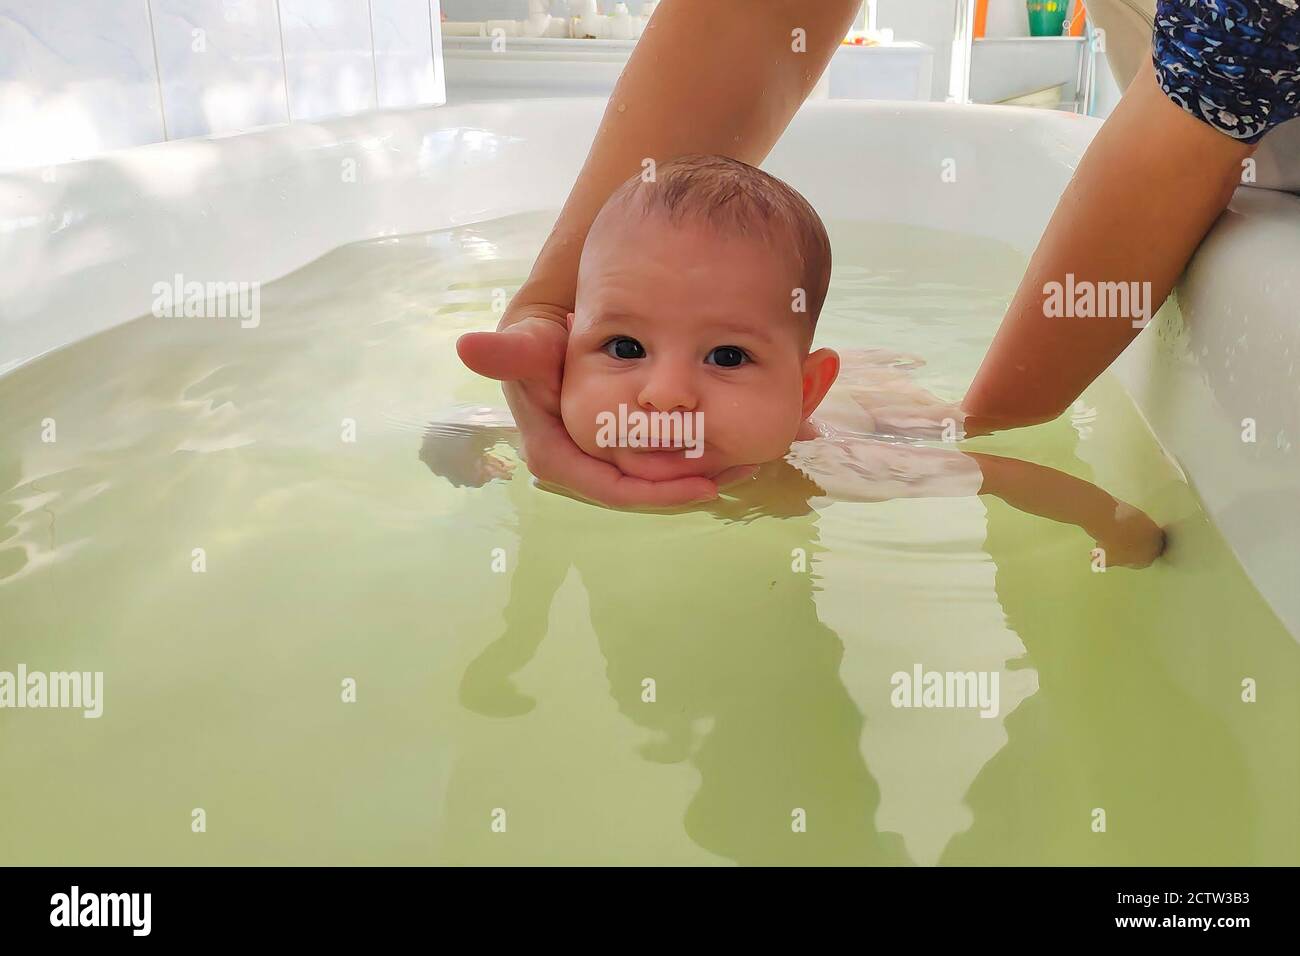 Infant baby in special pool with doctor instructor. Newborn children ...